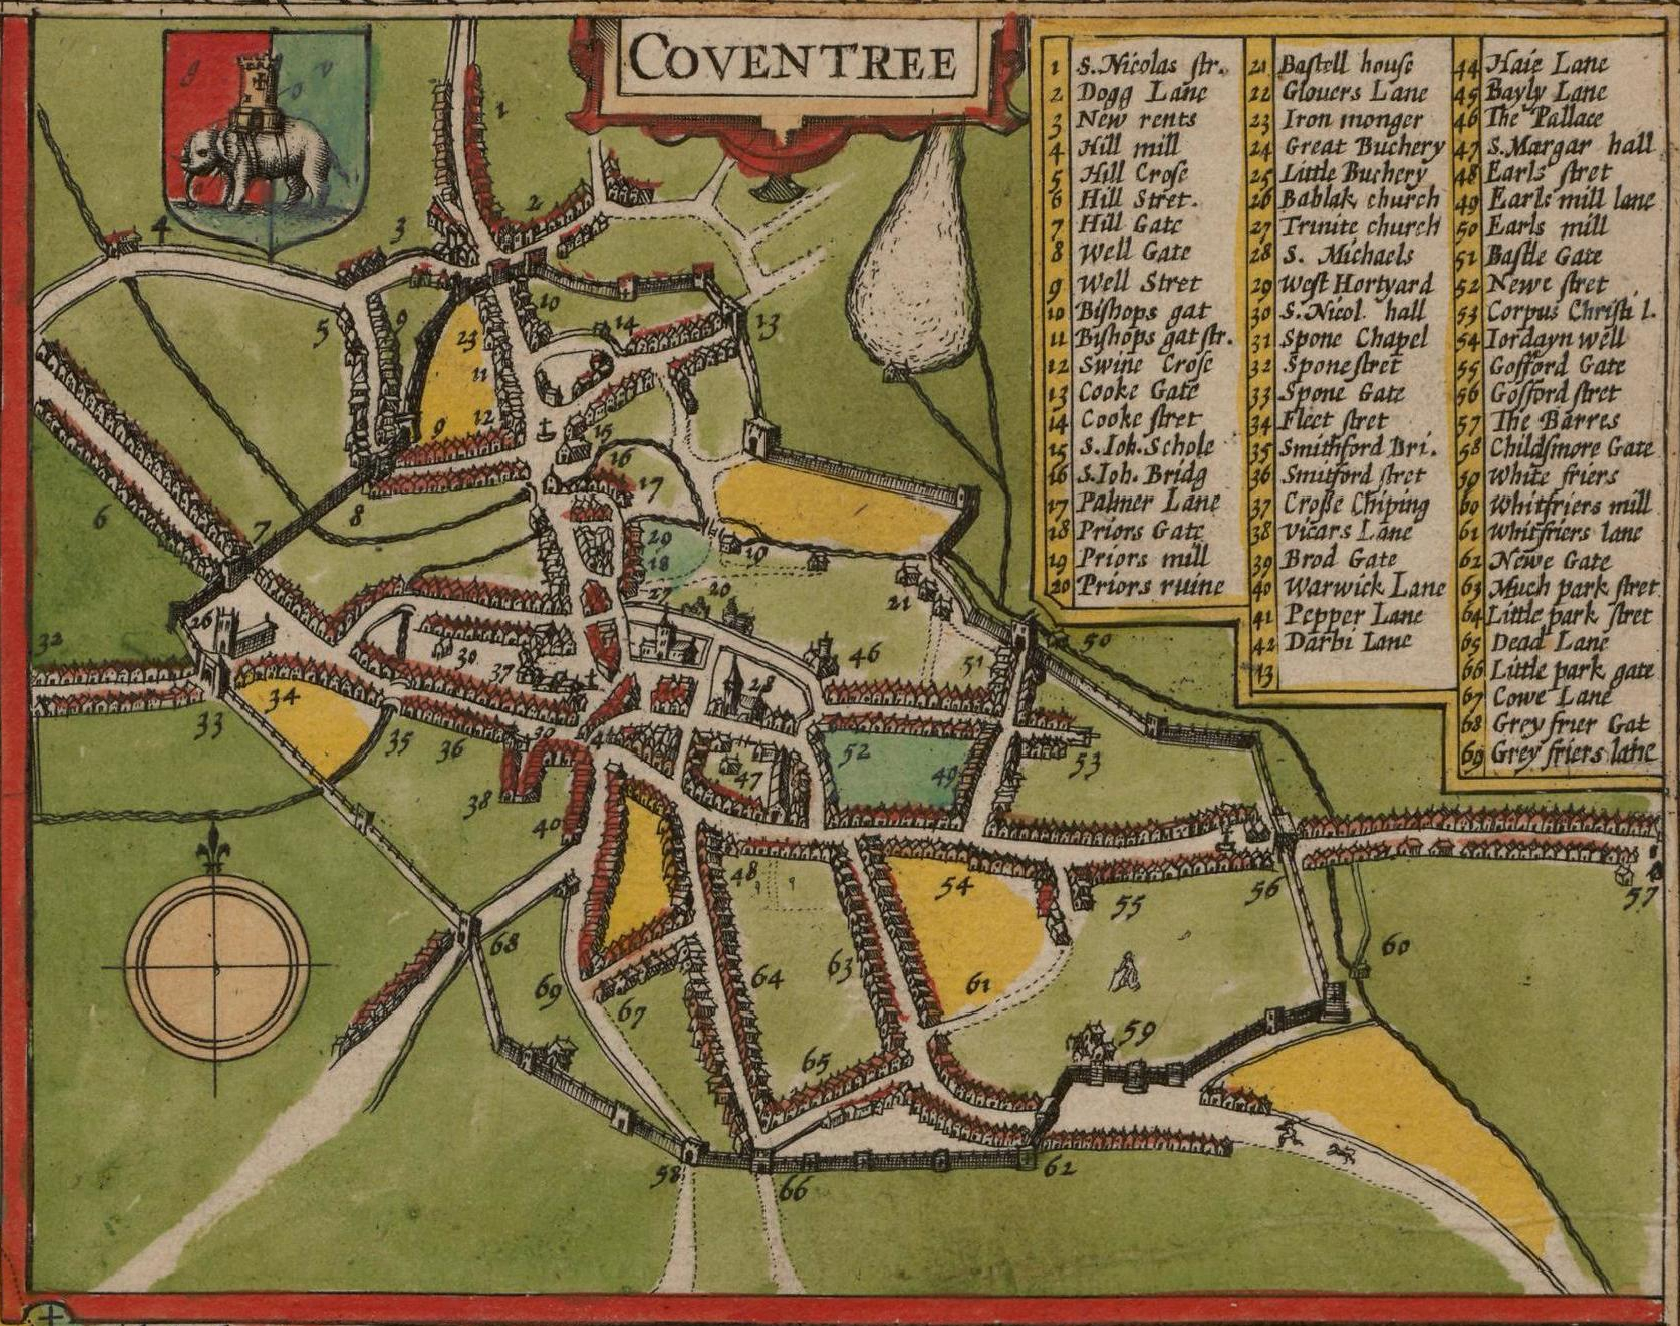 Map of Coventry by John Speed, published around 1610, showing the street layout and the city walls